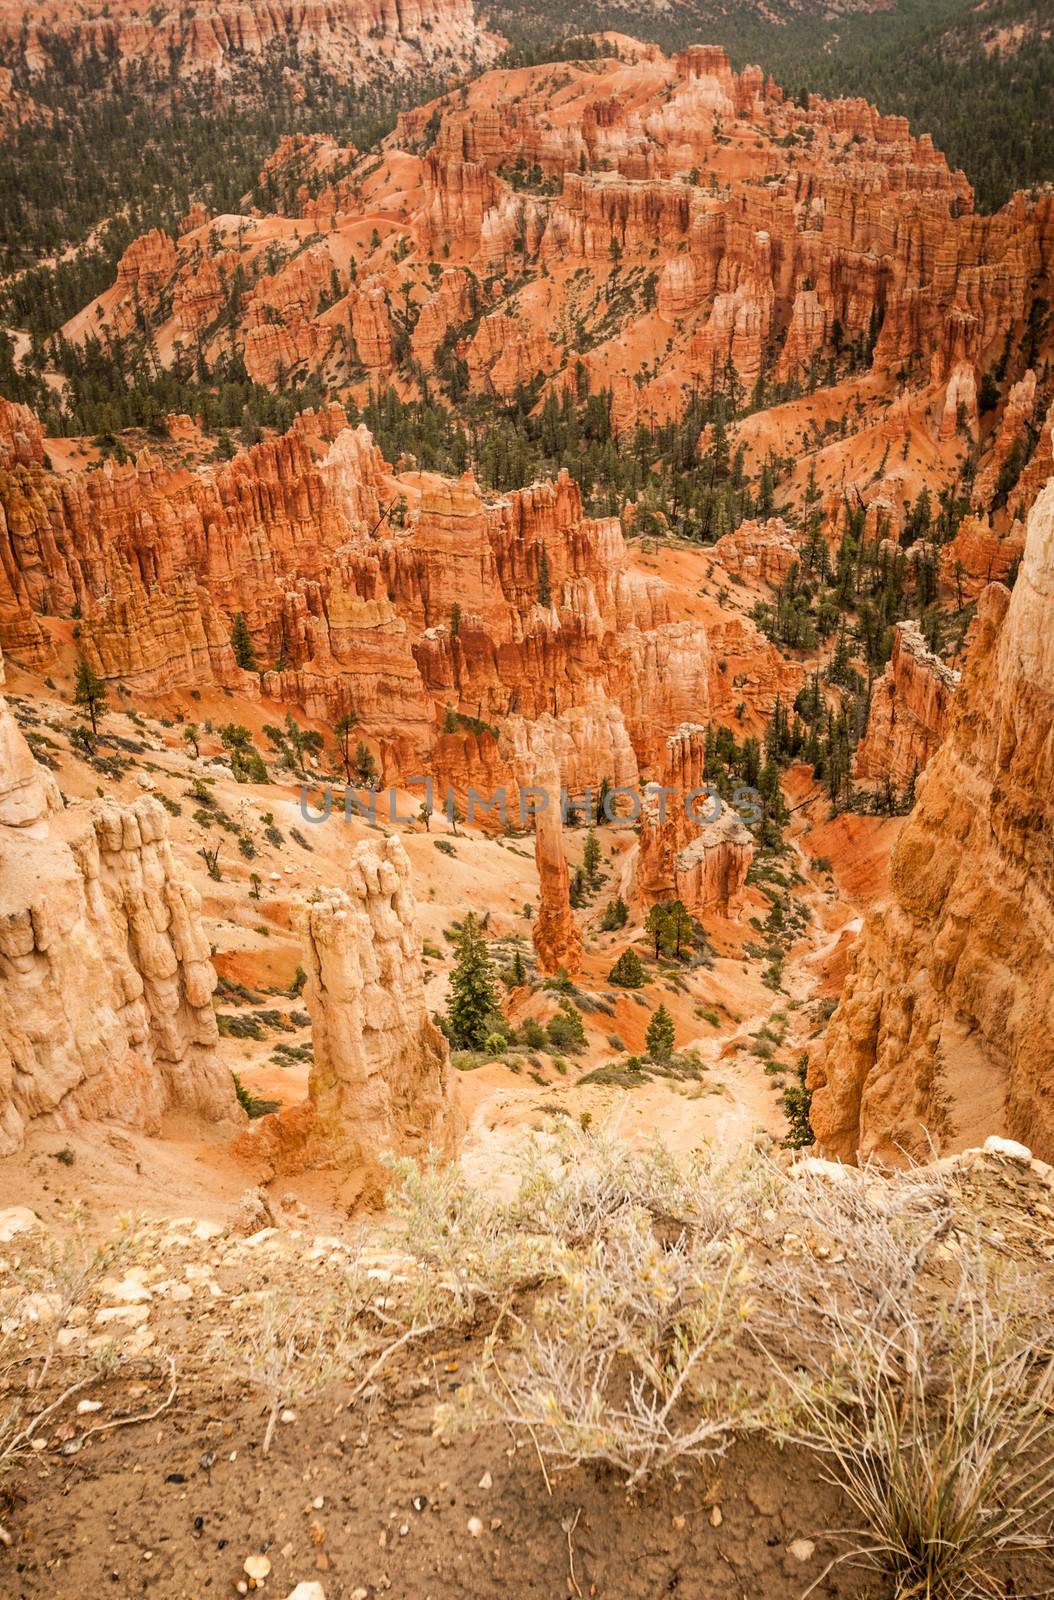 Canyon Bryce rocks and trees amphitheater west USA utah 2013